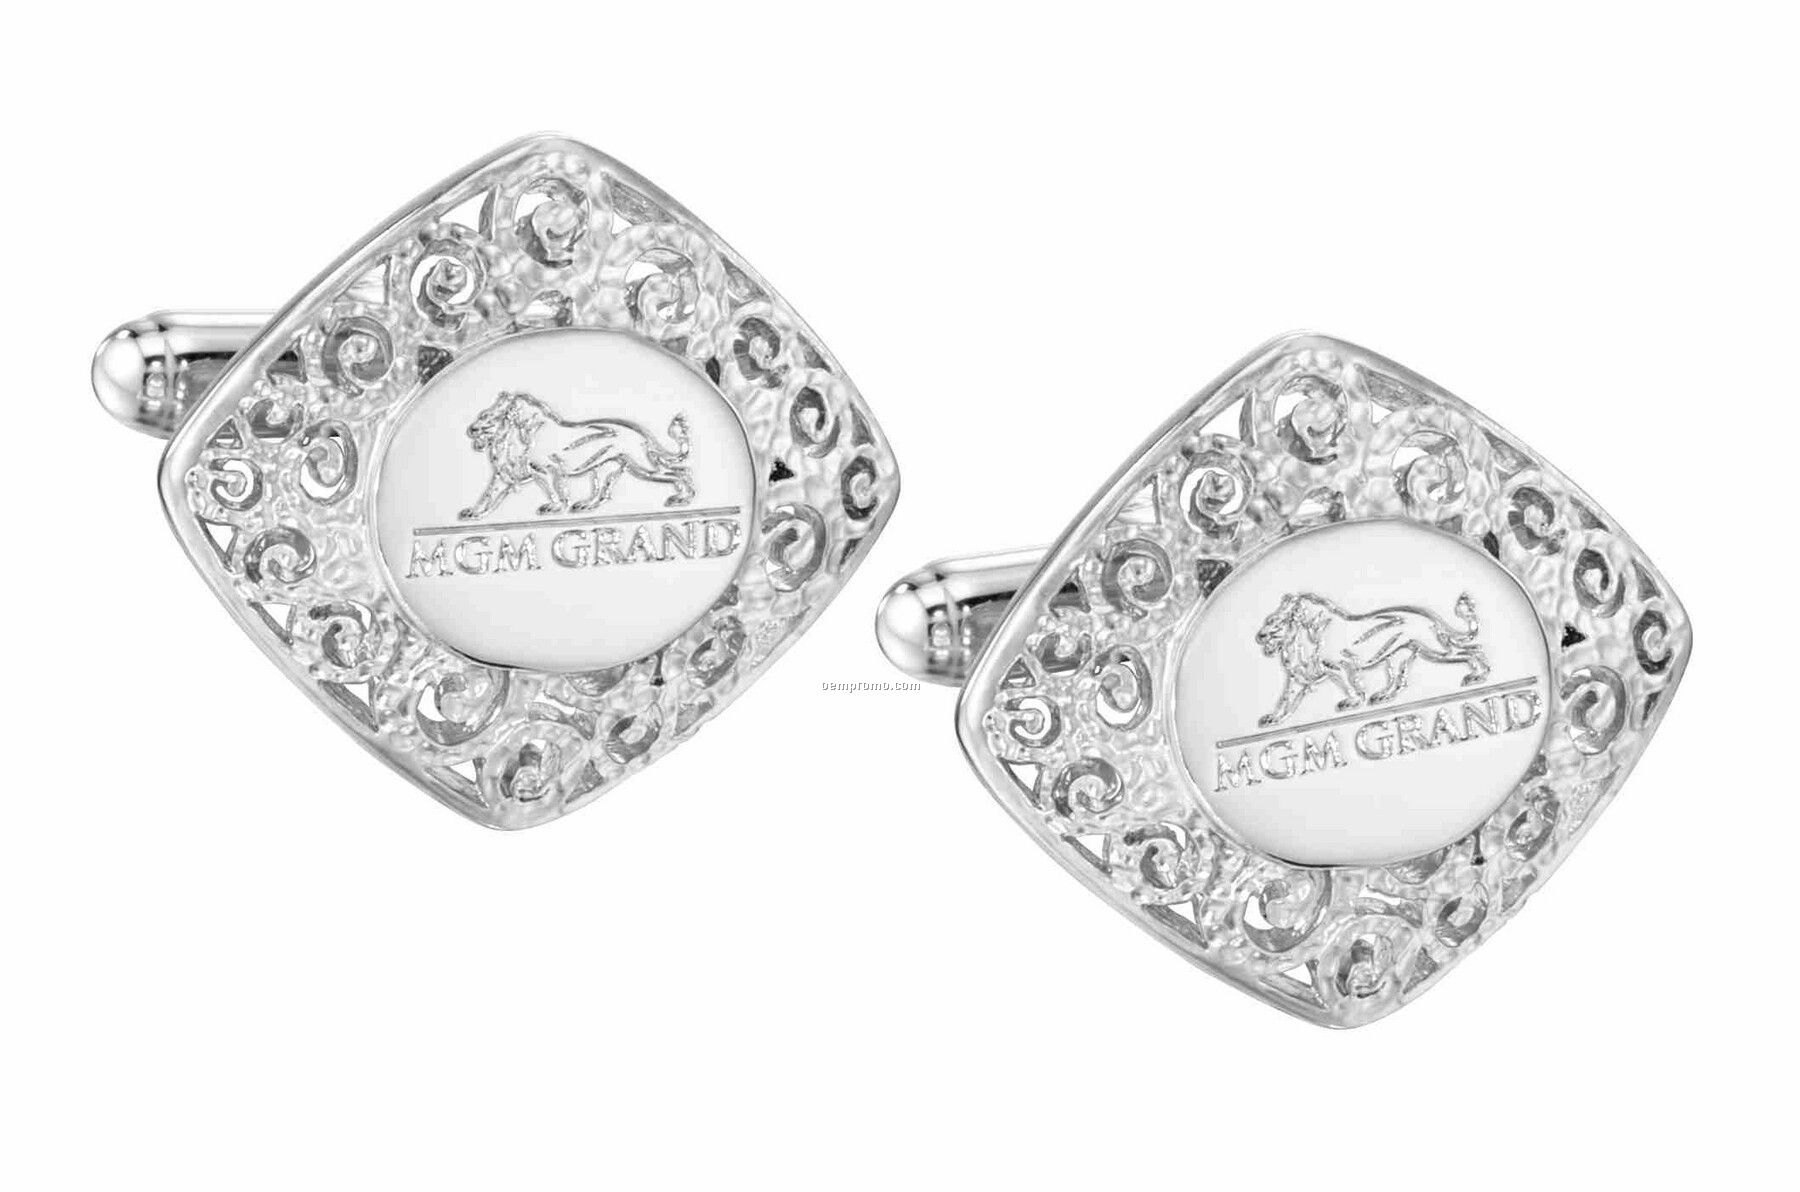 Ovations - Grandeur Silver Plated Cuff Links - Oval Area For Laser Engrave